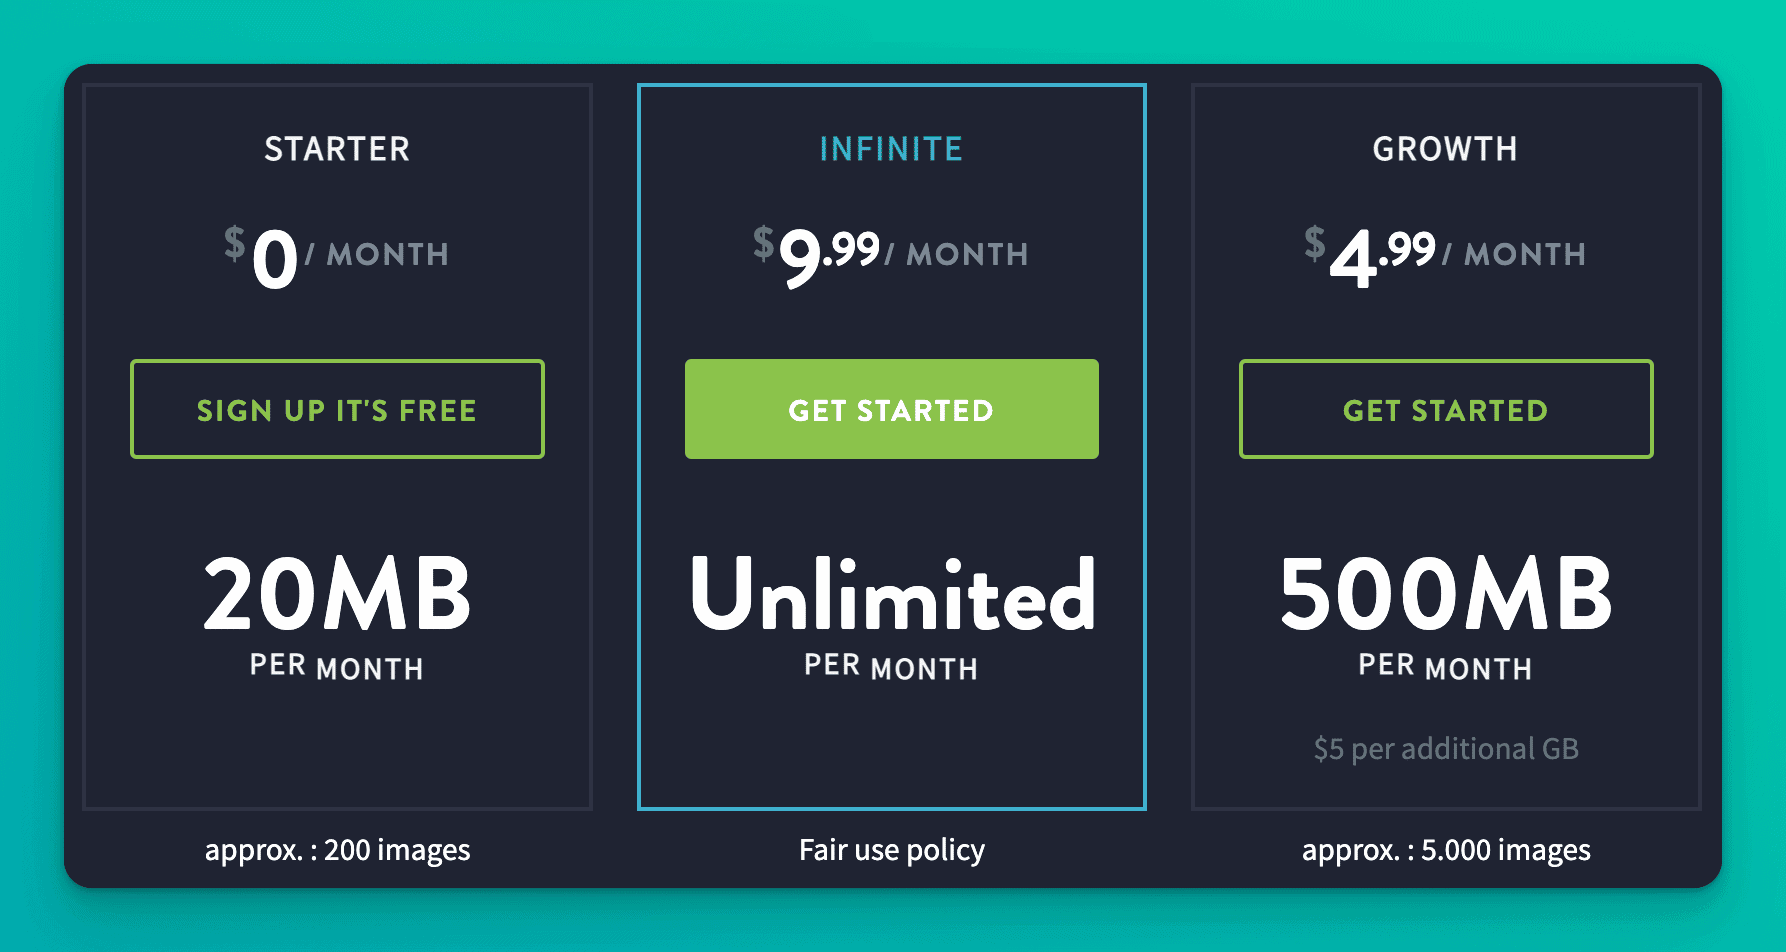 Imagify pricing model showing Starter ($0), Infinite ($10), and Growth ($5) plans.